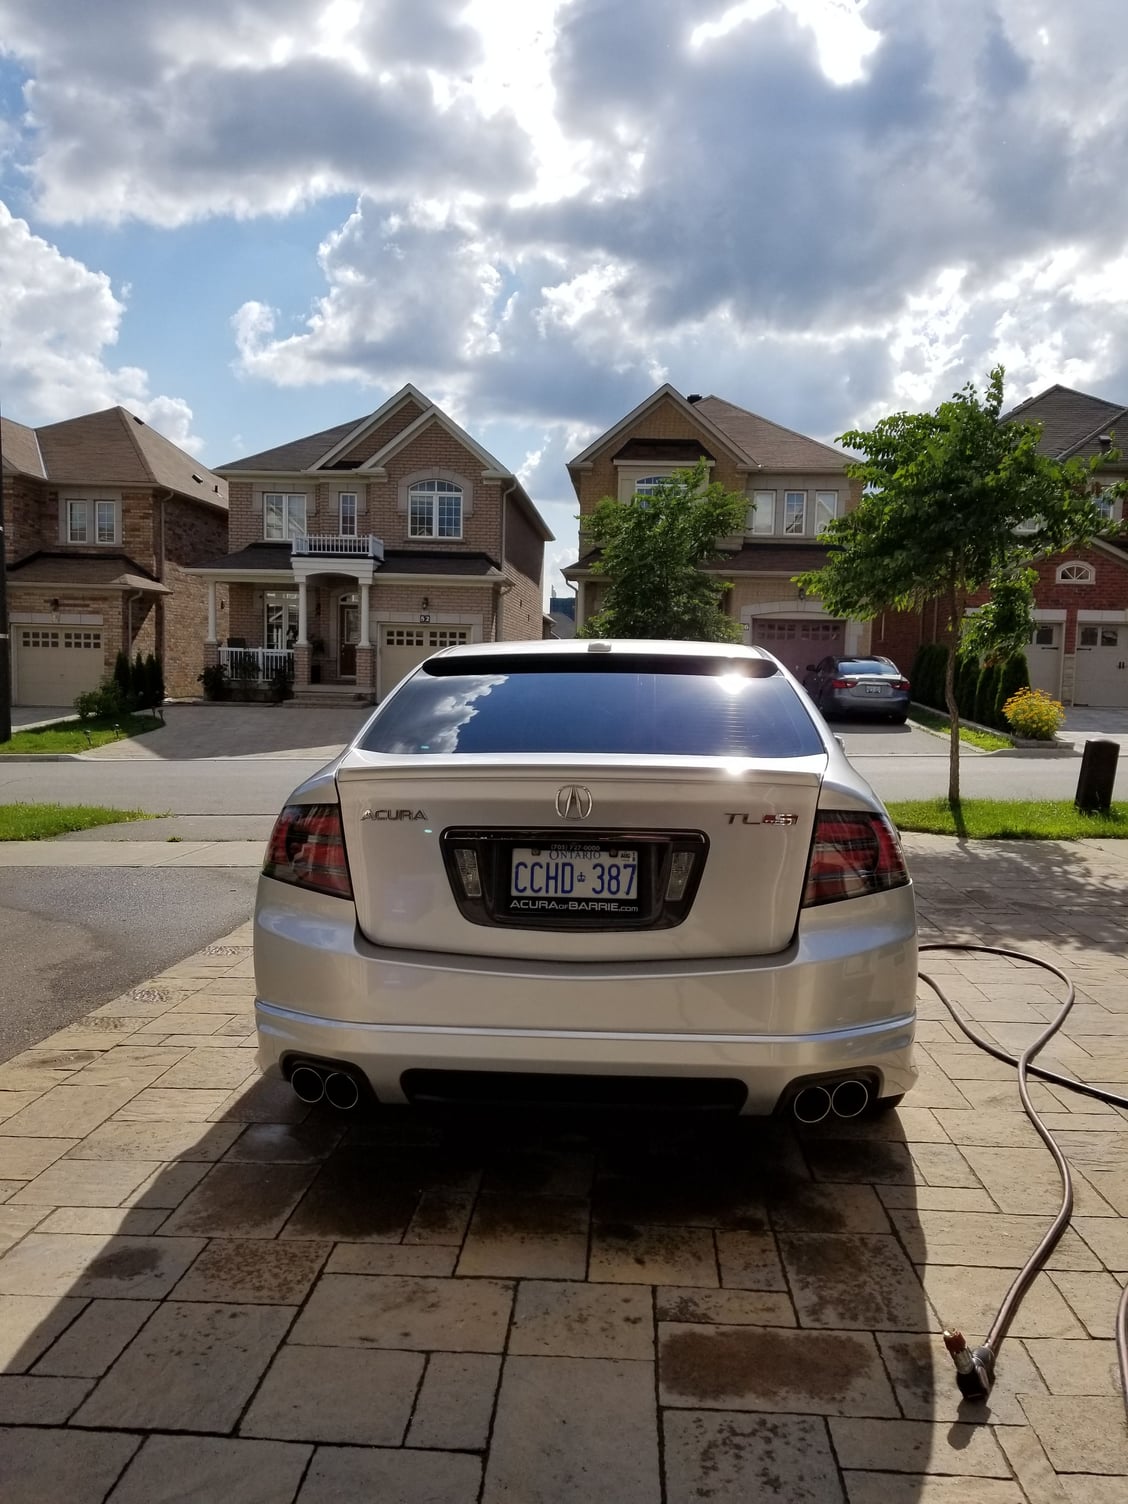 2008 Acura TL - EXPIRED: CLEAN 08 Acura TL Type S for sale!! Fully loaded! Must see!! - Used - VIN 19uua76588a802152 - 200 Miles - Automatic - Sedan - Silver - Vaughan, ON L6A, Canada